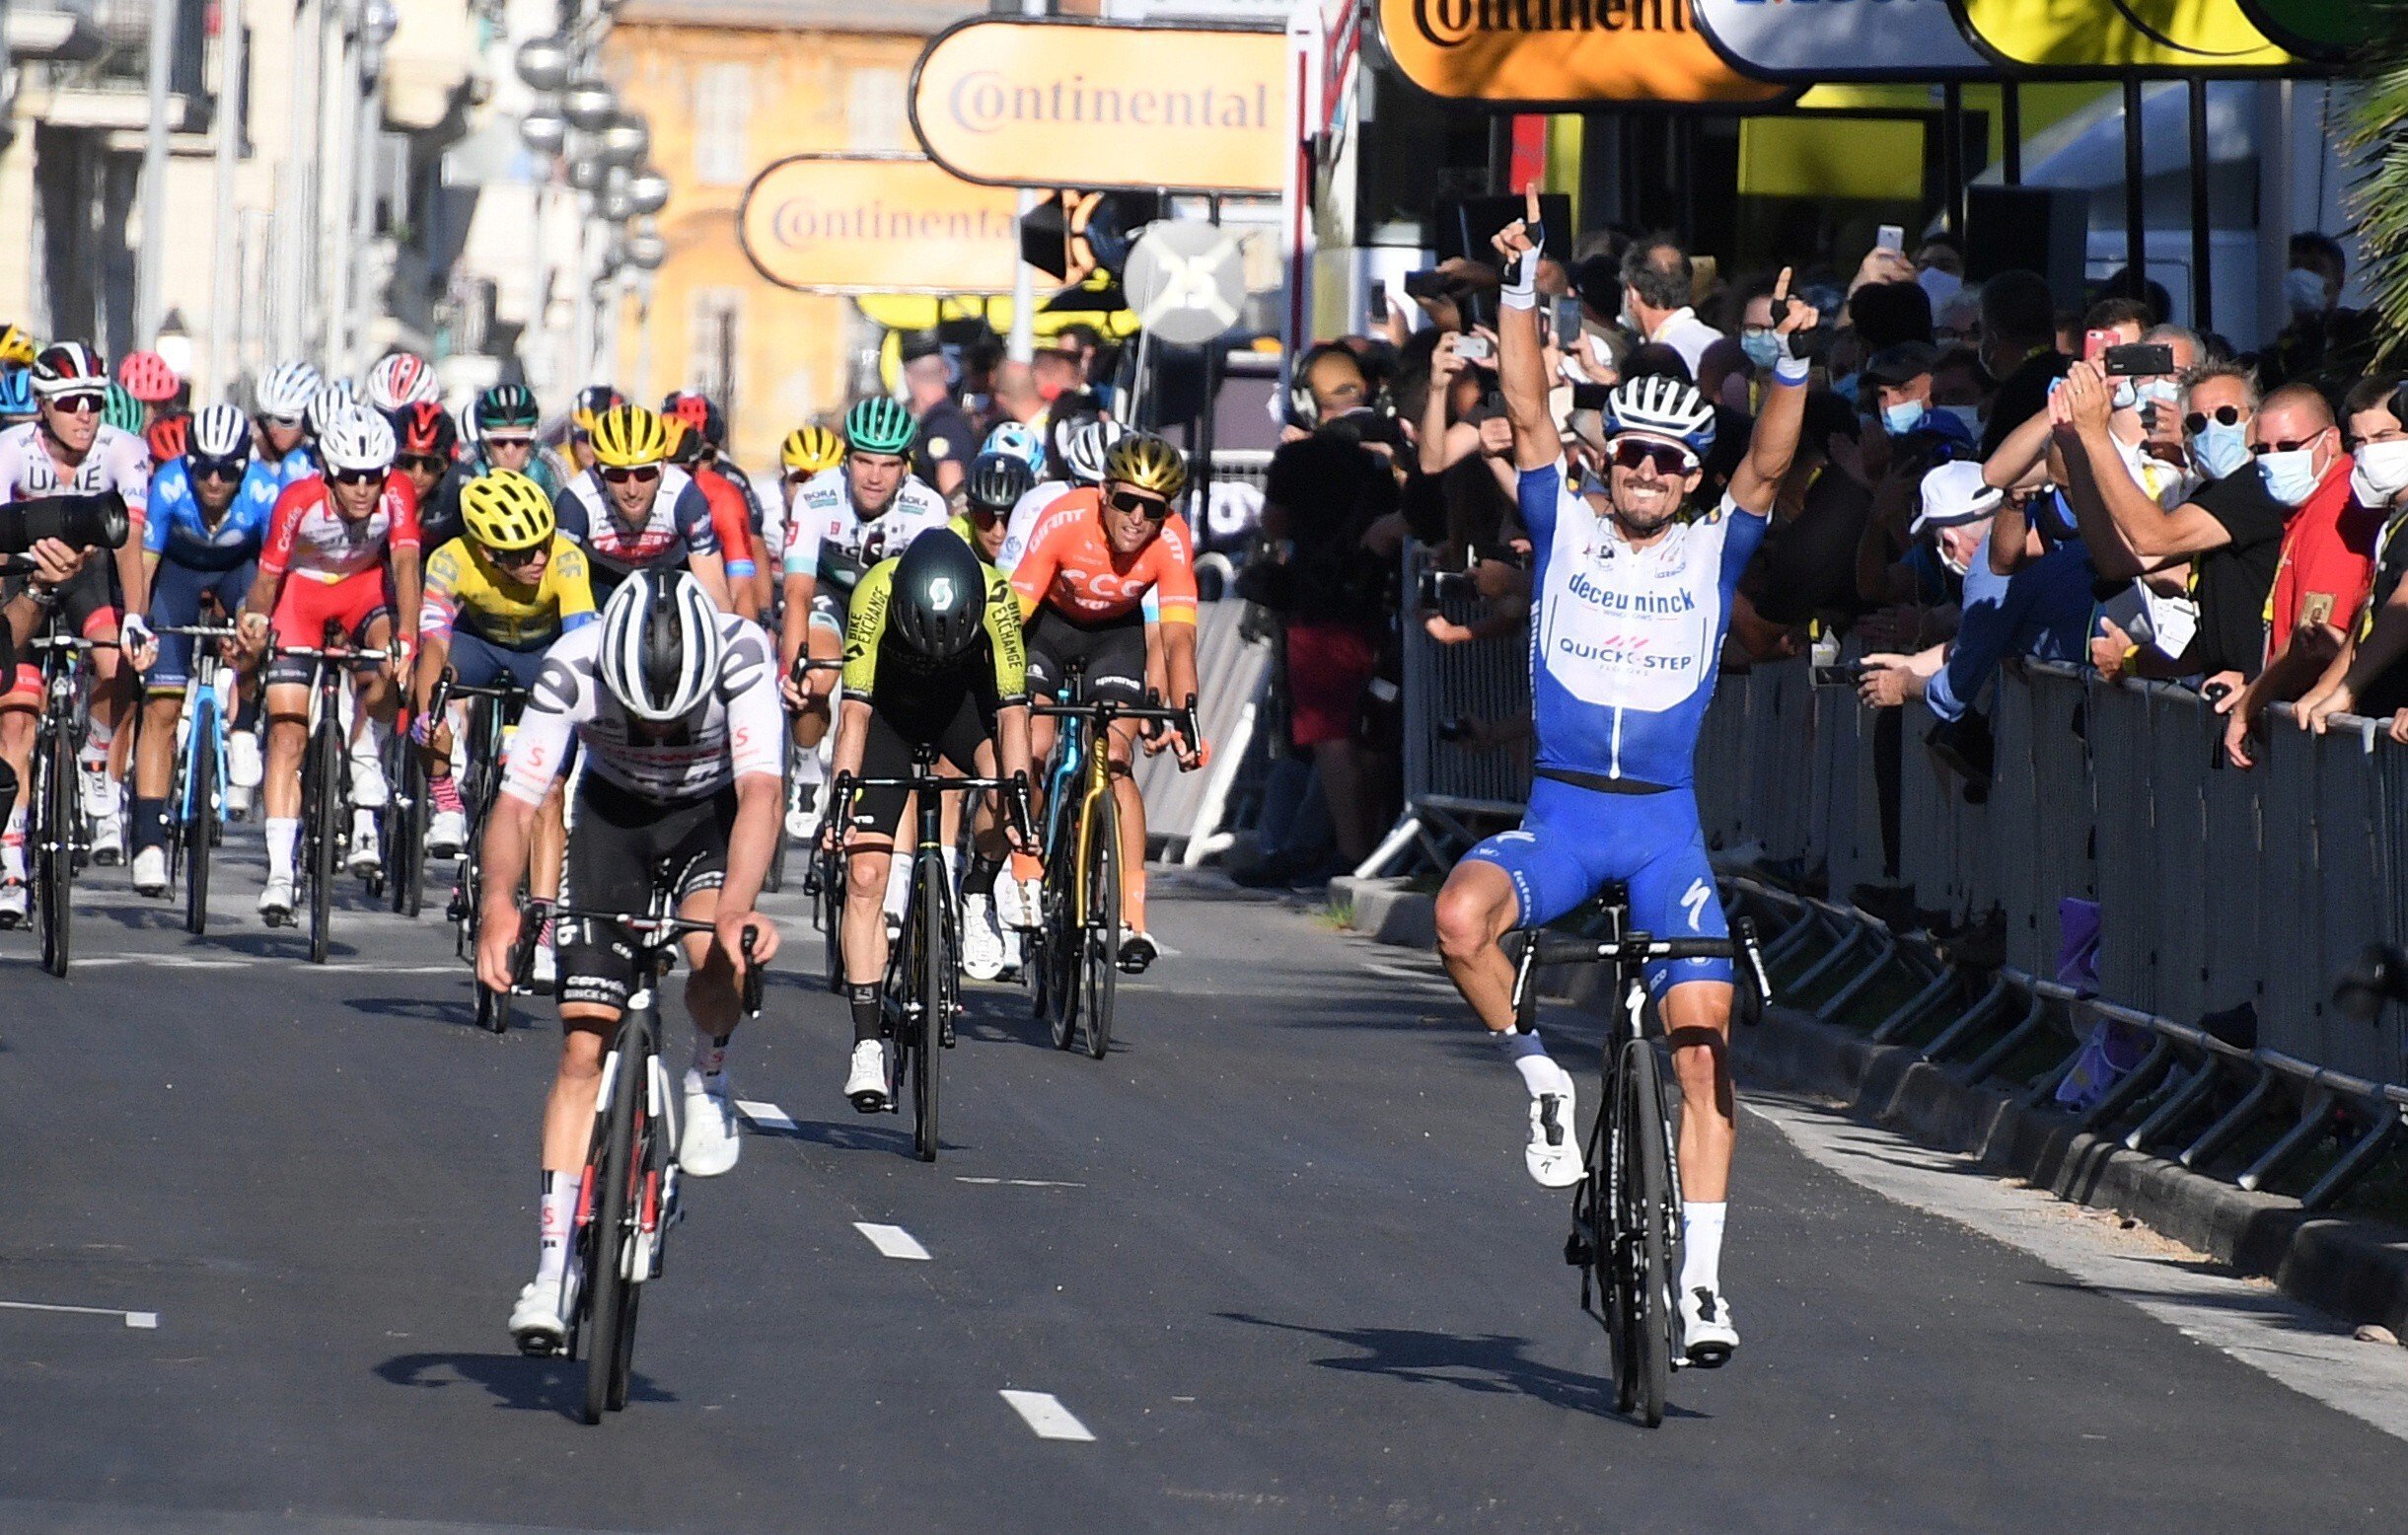 Deceuninck-Quick Step rider Julian Alaphilippe of France celebrates winning stage two. Photo: Reuters